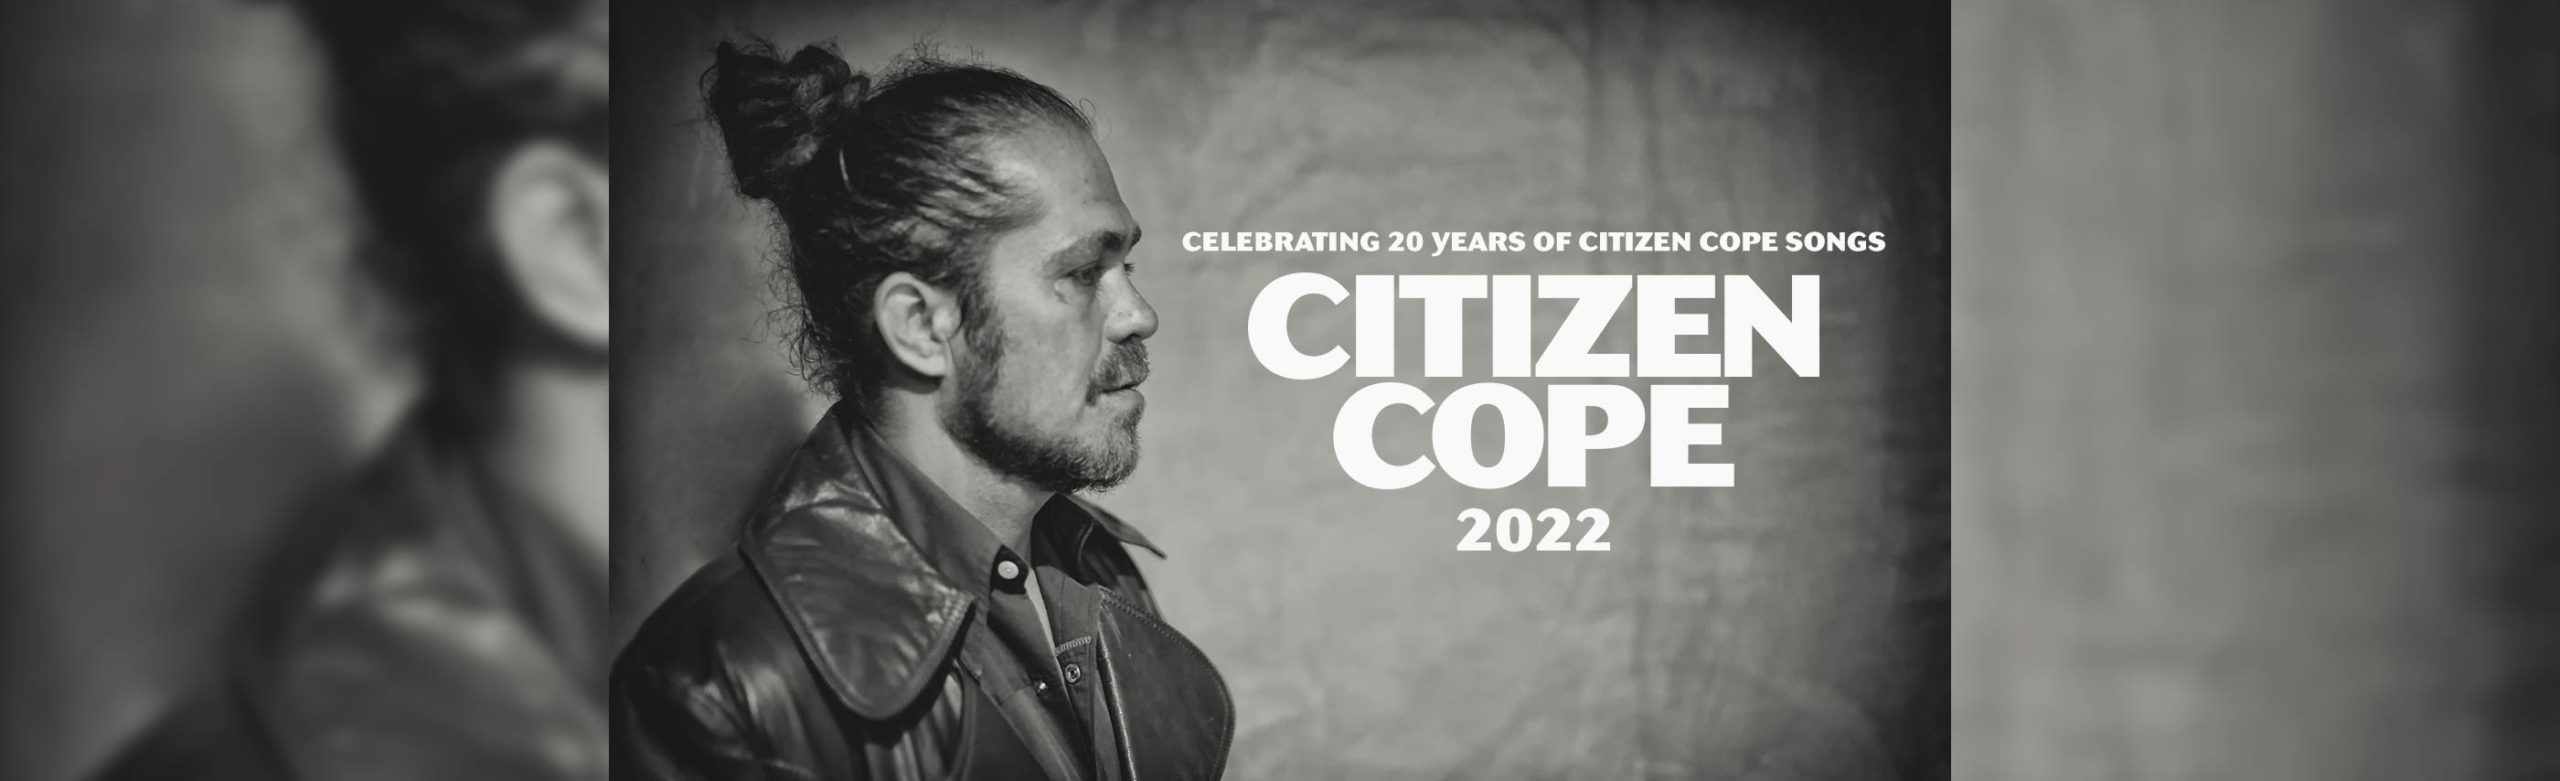 Citizen Cope Tickets + Tour Poster Giveaway 2022 Image